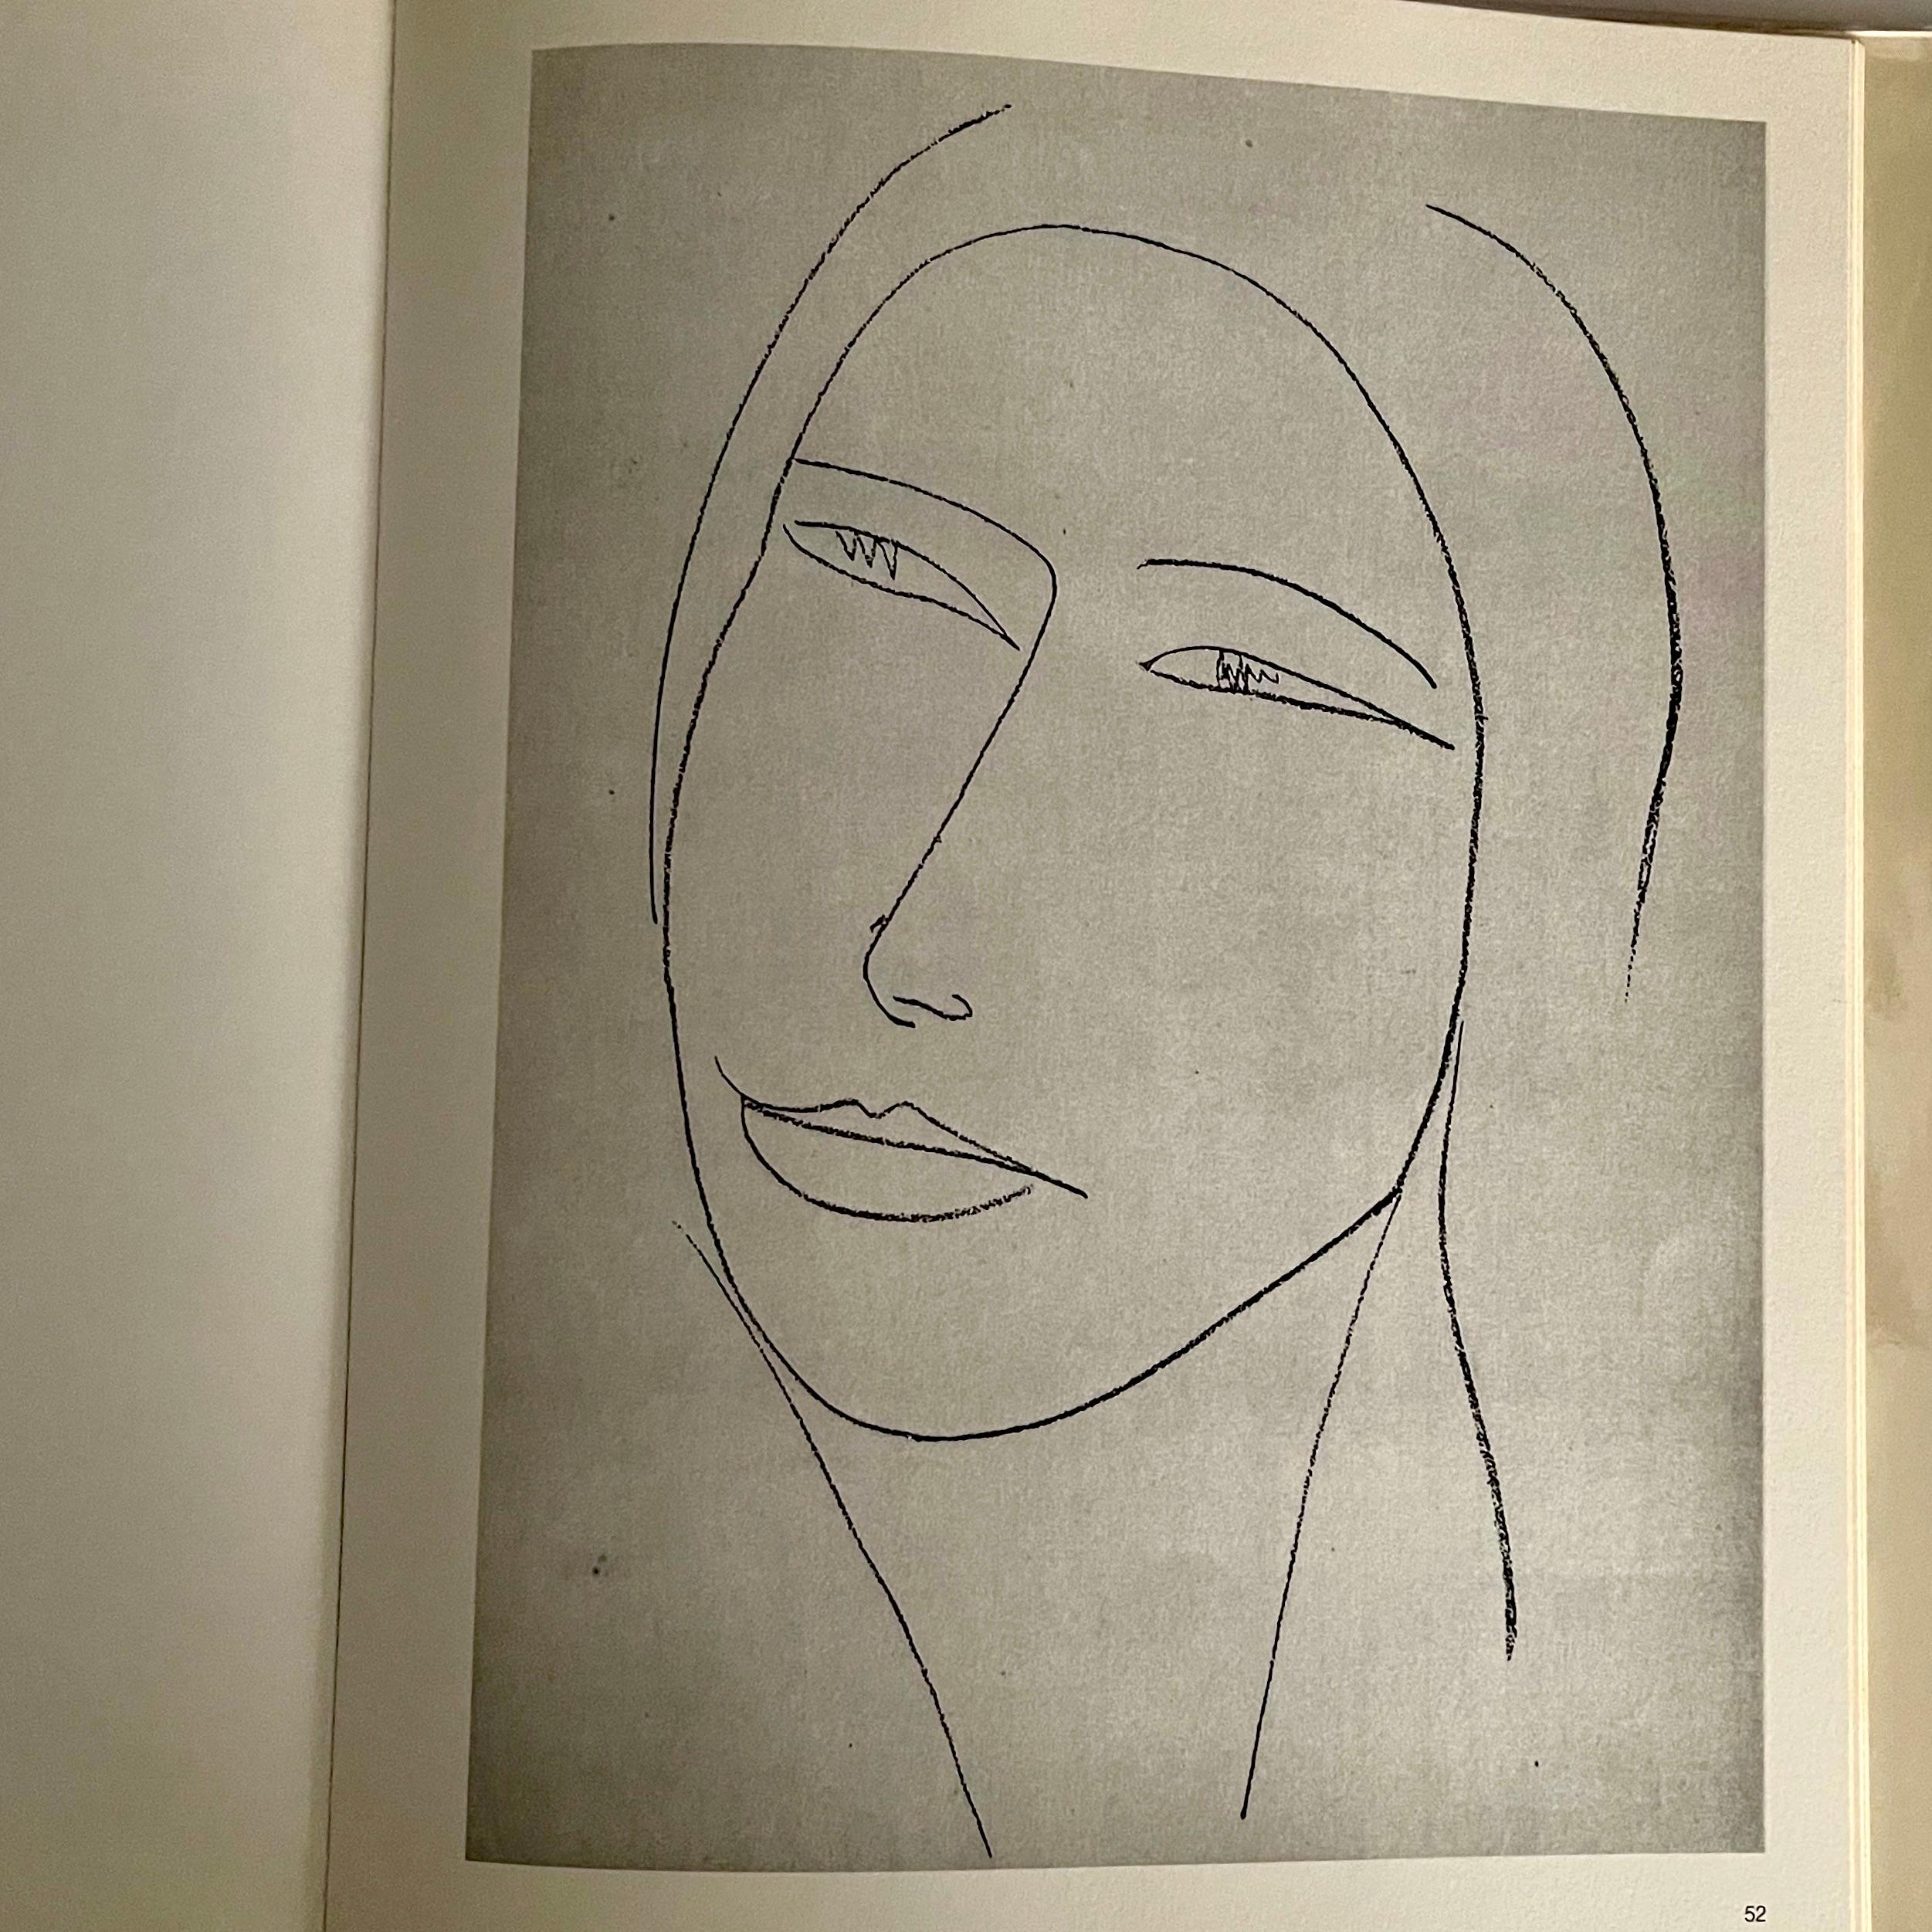 Matisse, Plume, Crayon, Fusain, Papiers Collés.
Published by Éditions Cercle d’Art.
A beautifully printed publication exploring the work of Henri Matisse, with a focus on pen, pencil, charcoal and collage.

Dimensions: H 31cm x W 21cm x D 3.5cm
